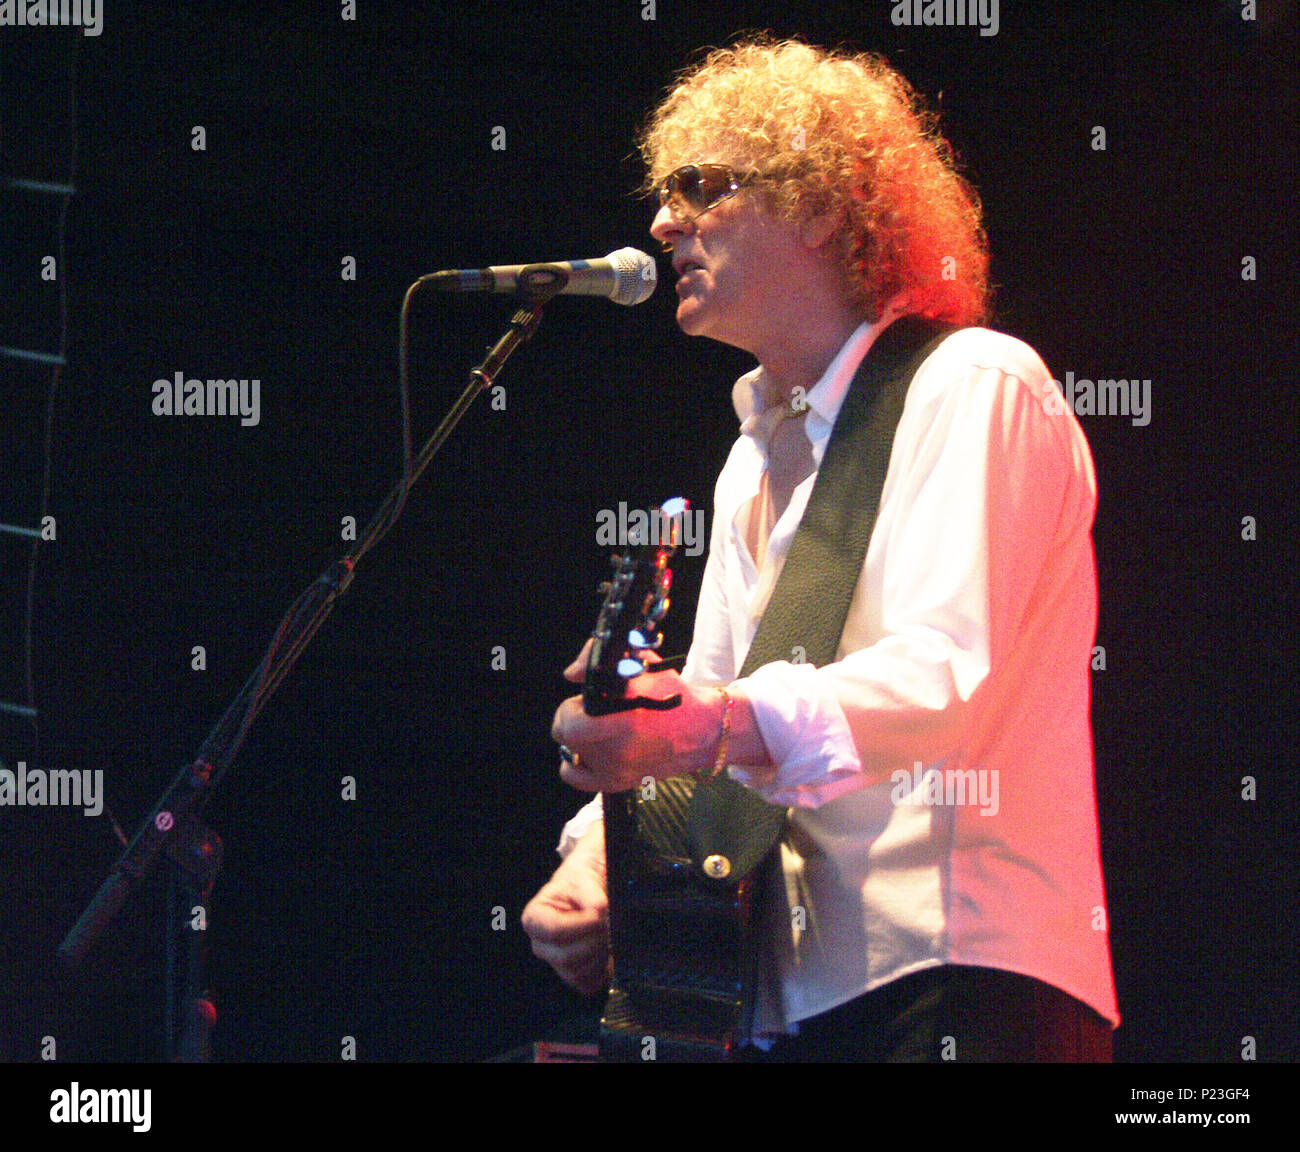 ATLANTA, GA - AUGUST 13: Mott The Hoople's Ian Hunter performs with Ringo Starr And His All-Starr Band at Chastain Park Amphitheatre in Atlanta, Georgia on August 13, 2001. Credit: Chris McKay / MediaPunch Stock Photo